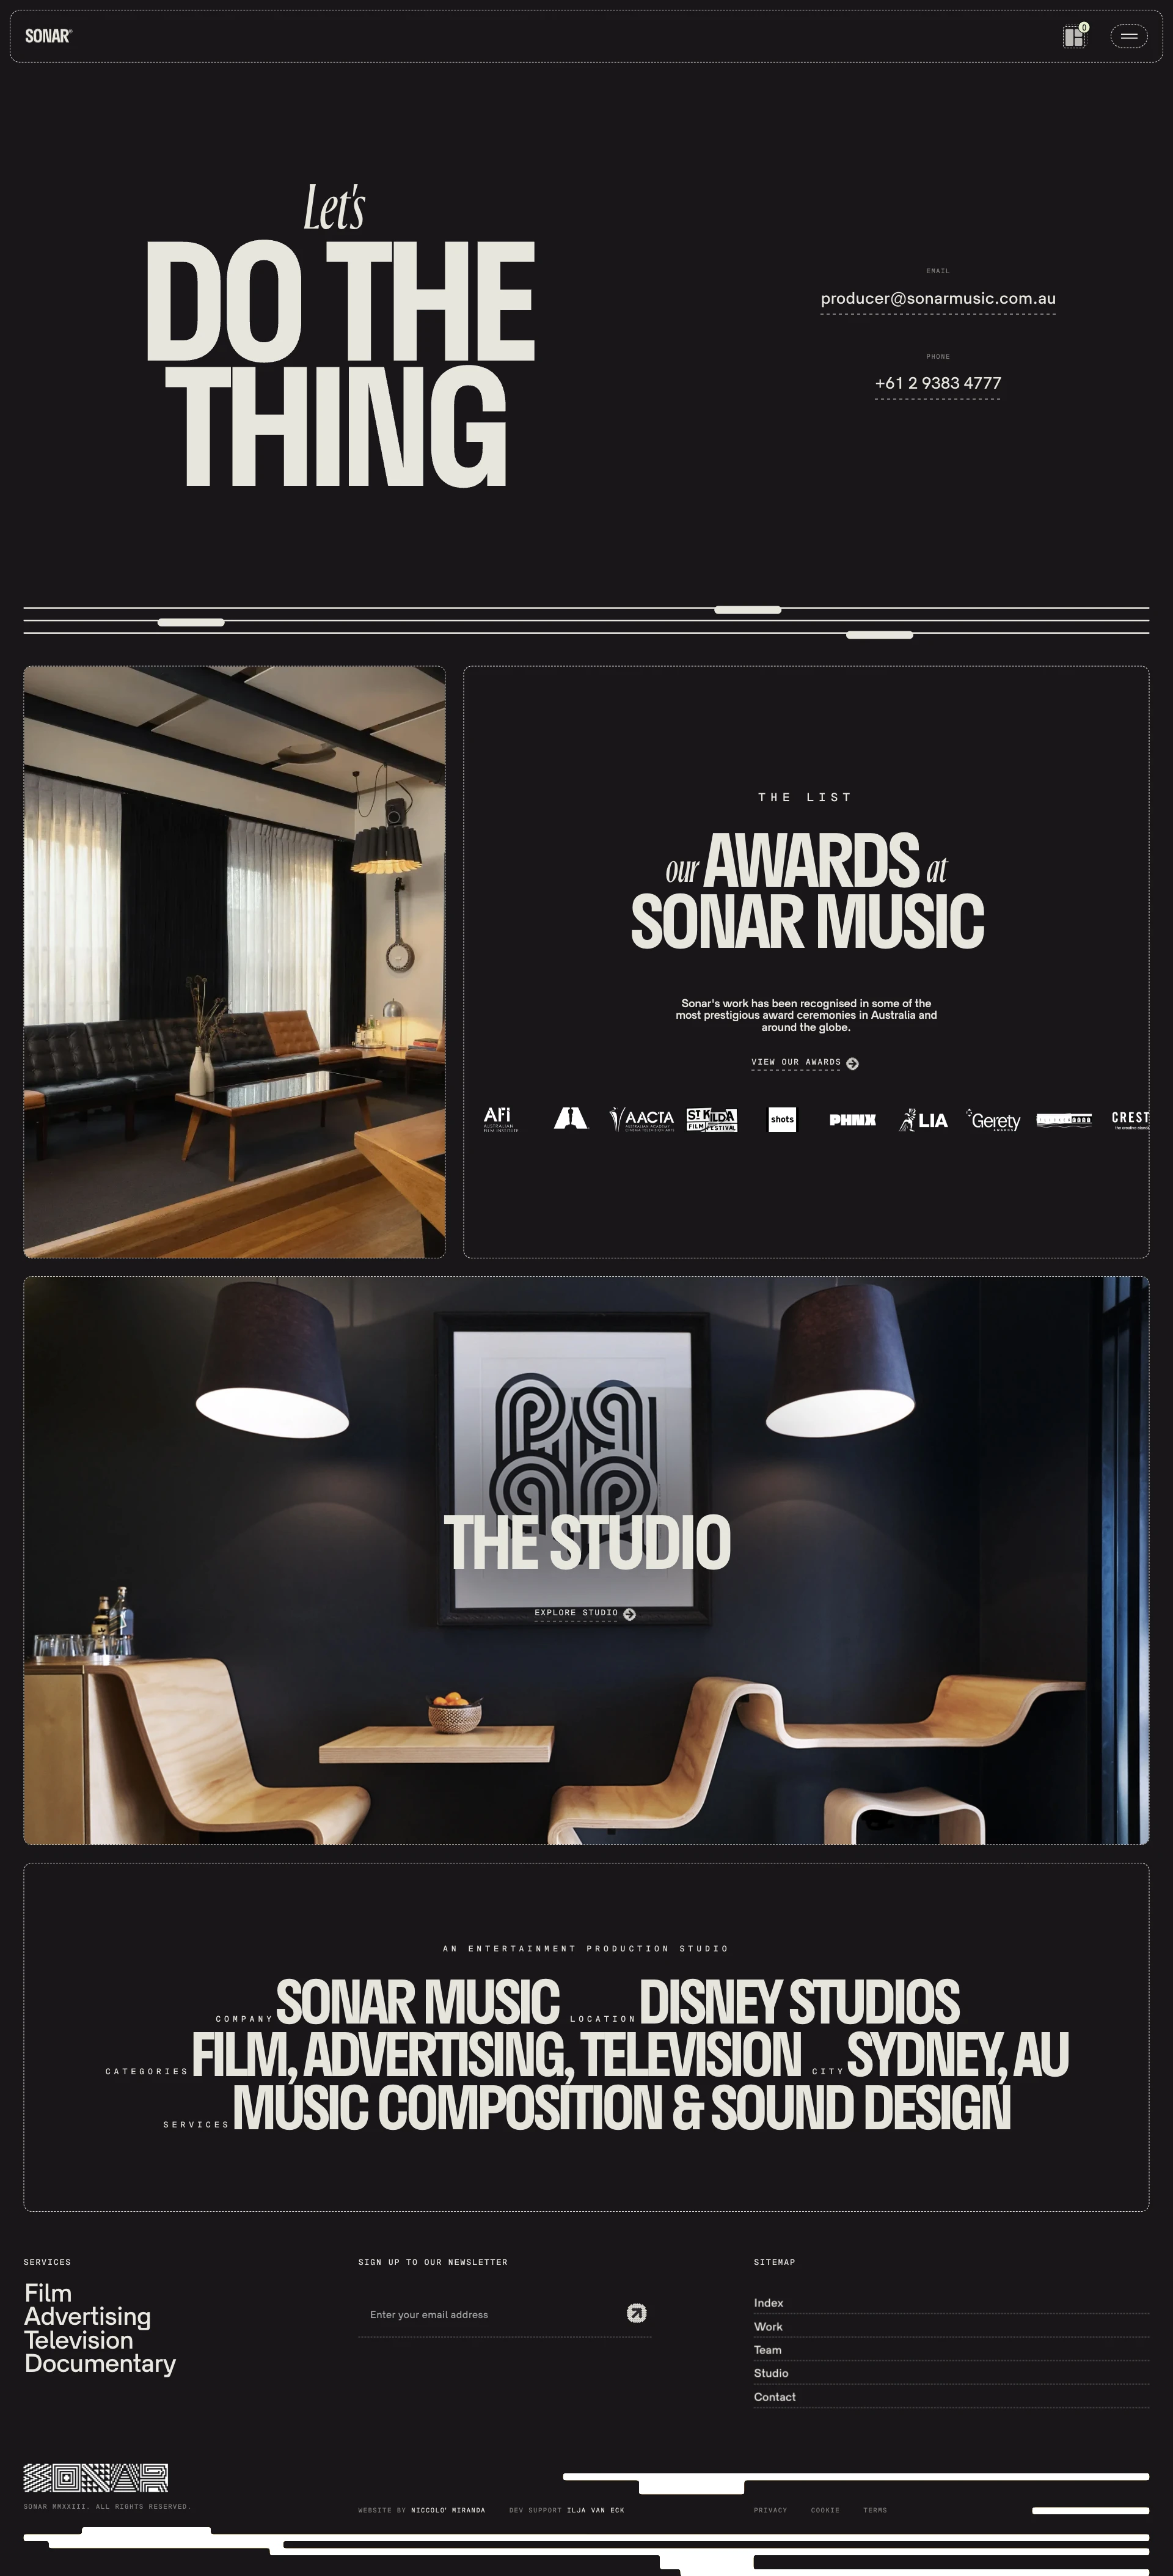 Sonar Landing Page Example: Sonar Music is a renowned music and sound studio based in Disney Studios, Australia, that houses the nation's most distinguished composers and sound designers.